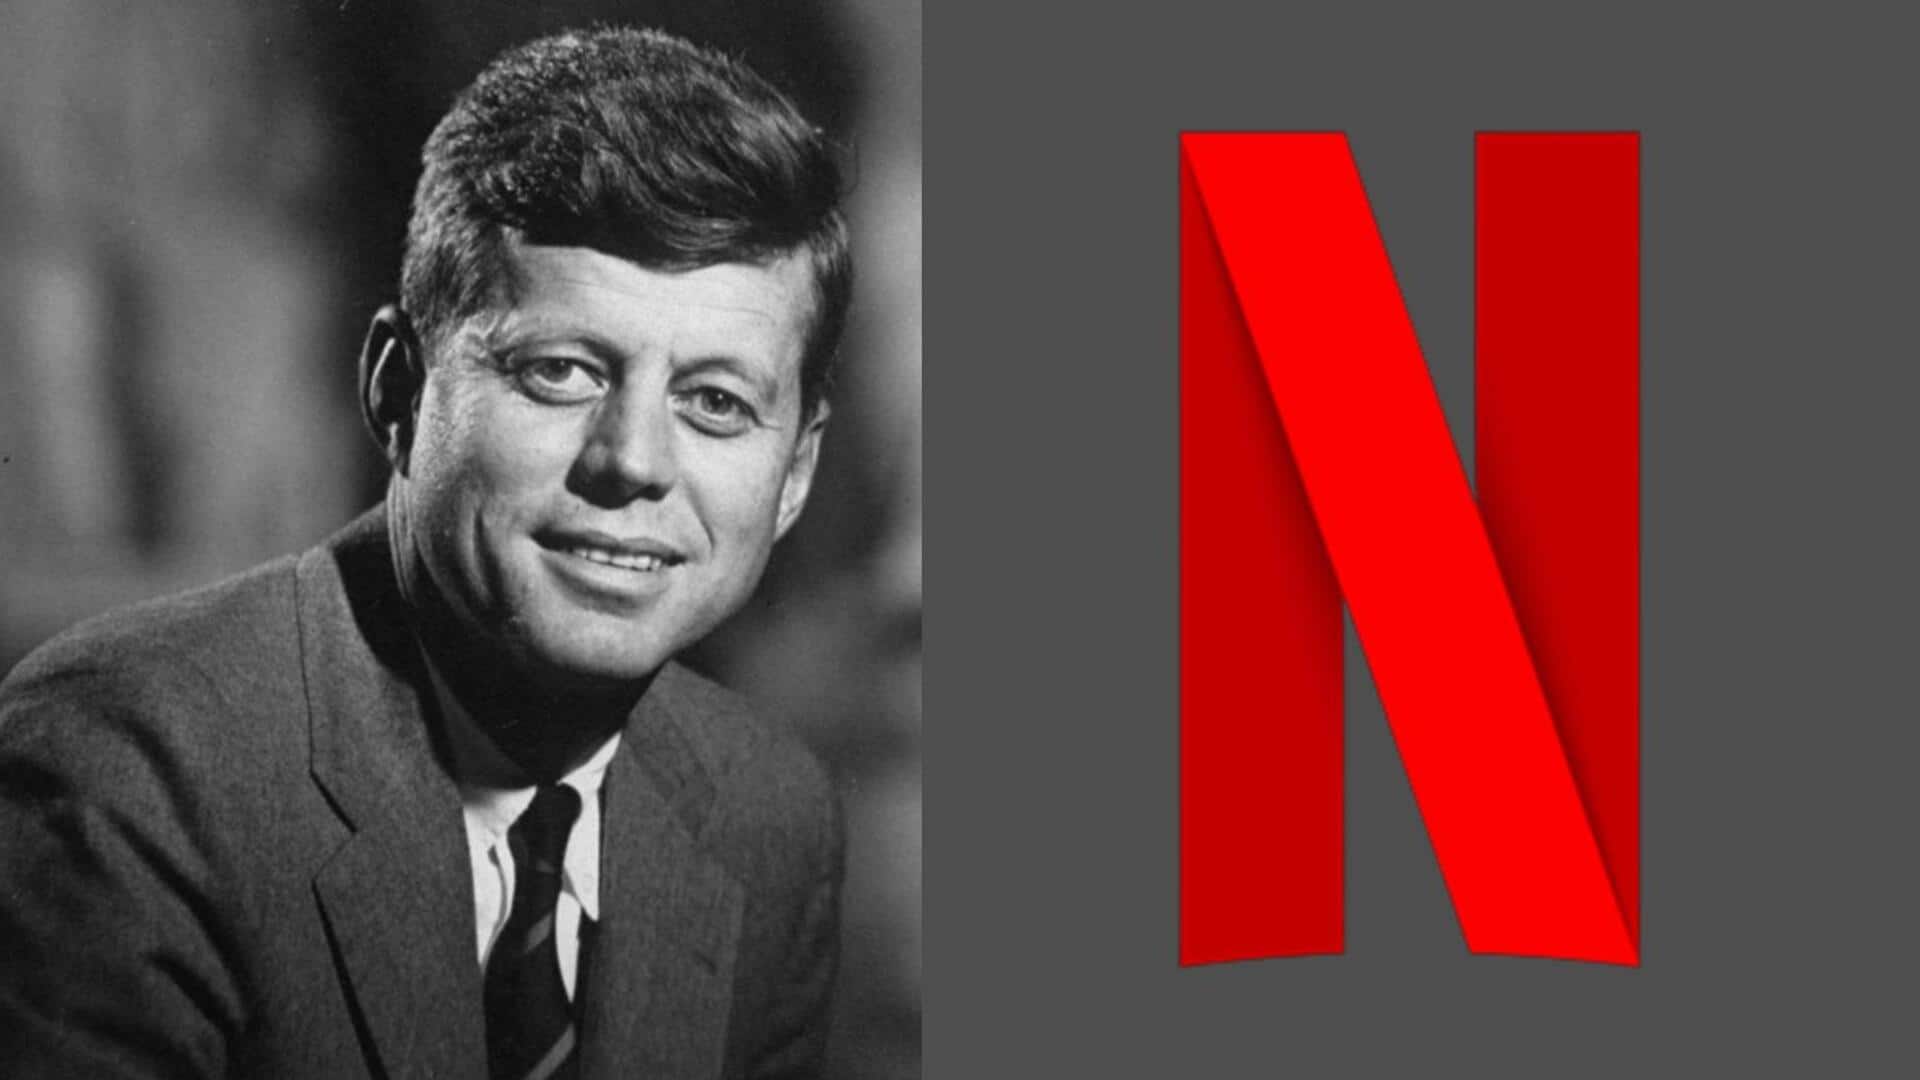 John F Kennedy series in the making at Netflix: Report